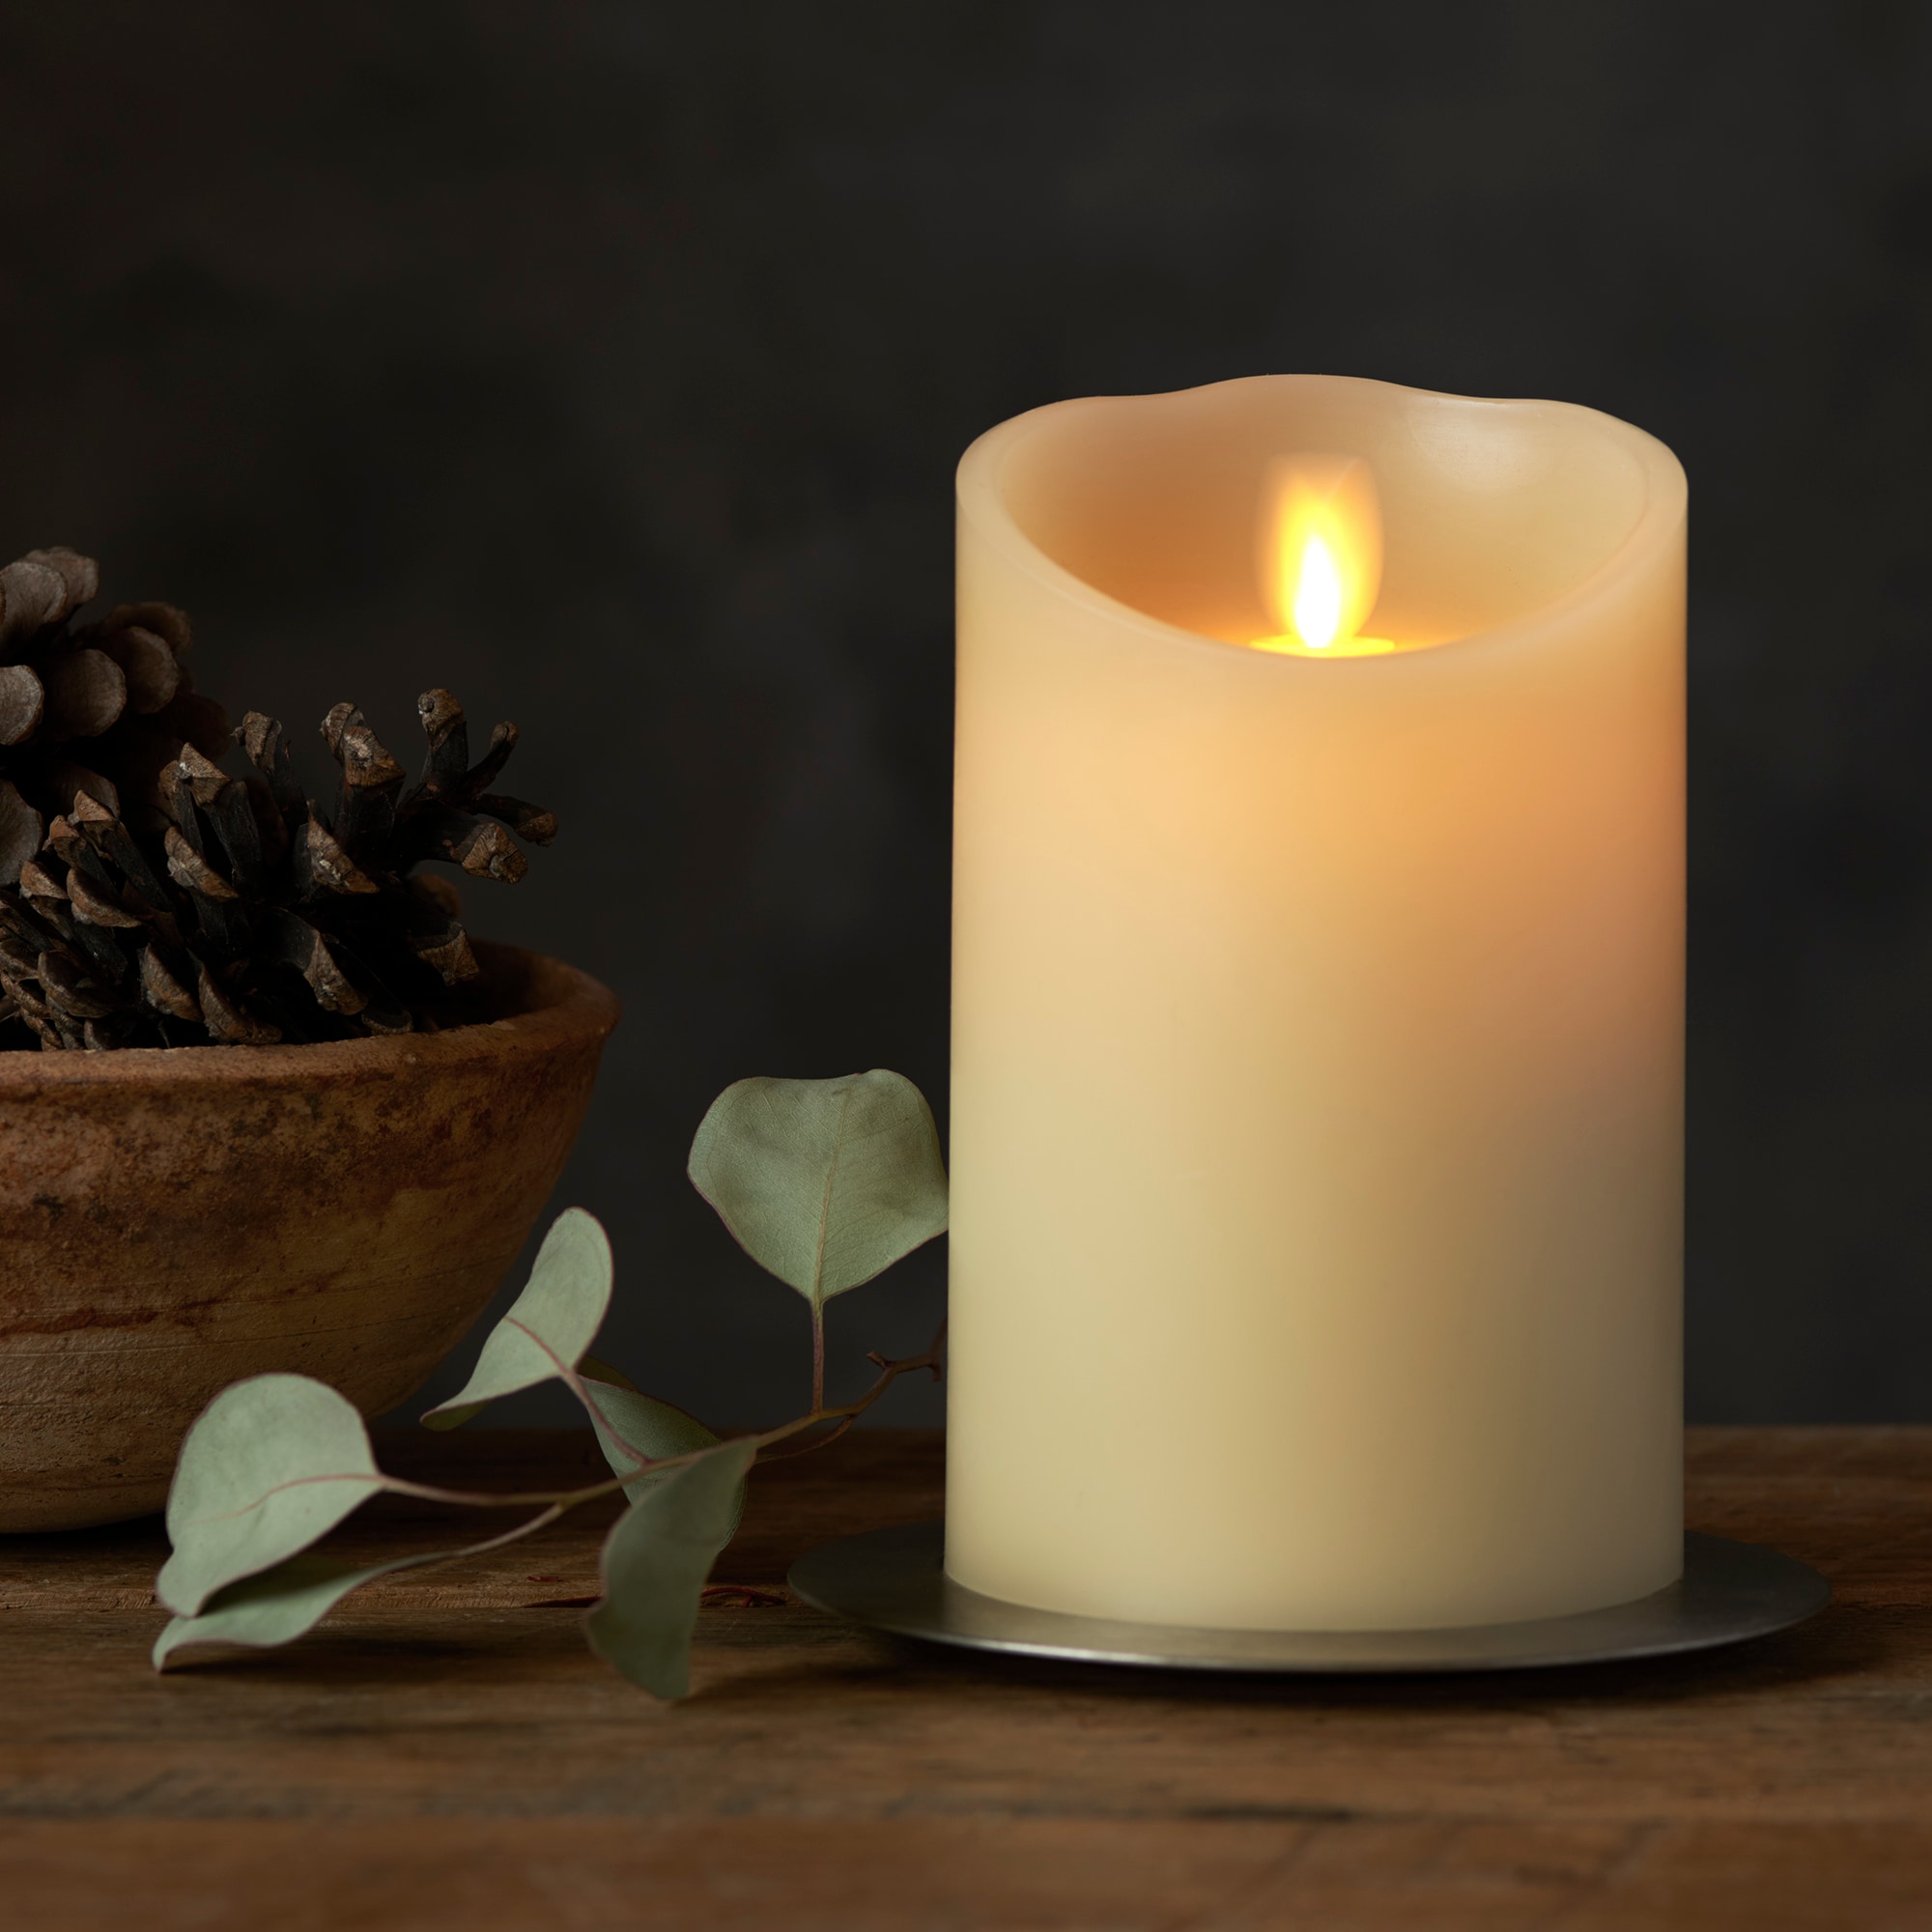 Luminara 1-Wick Vanilla Off-white Flameless Electric Candle at Lowes.com